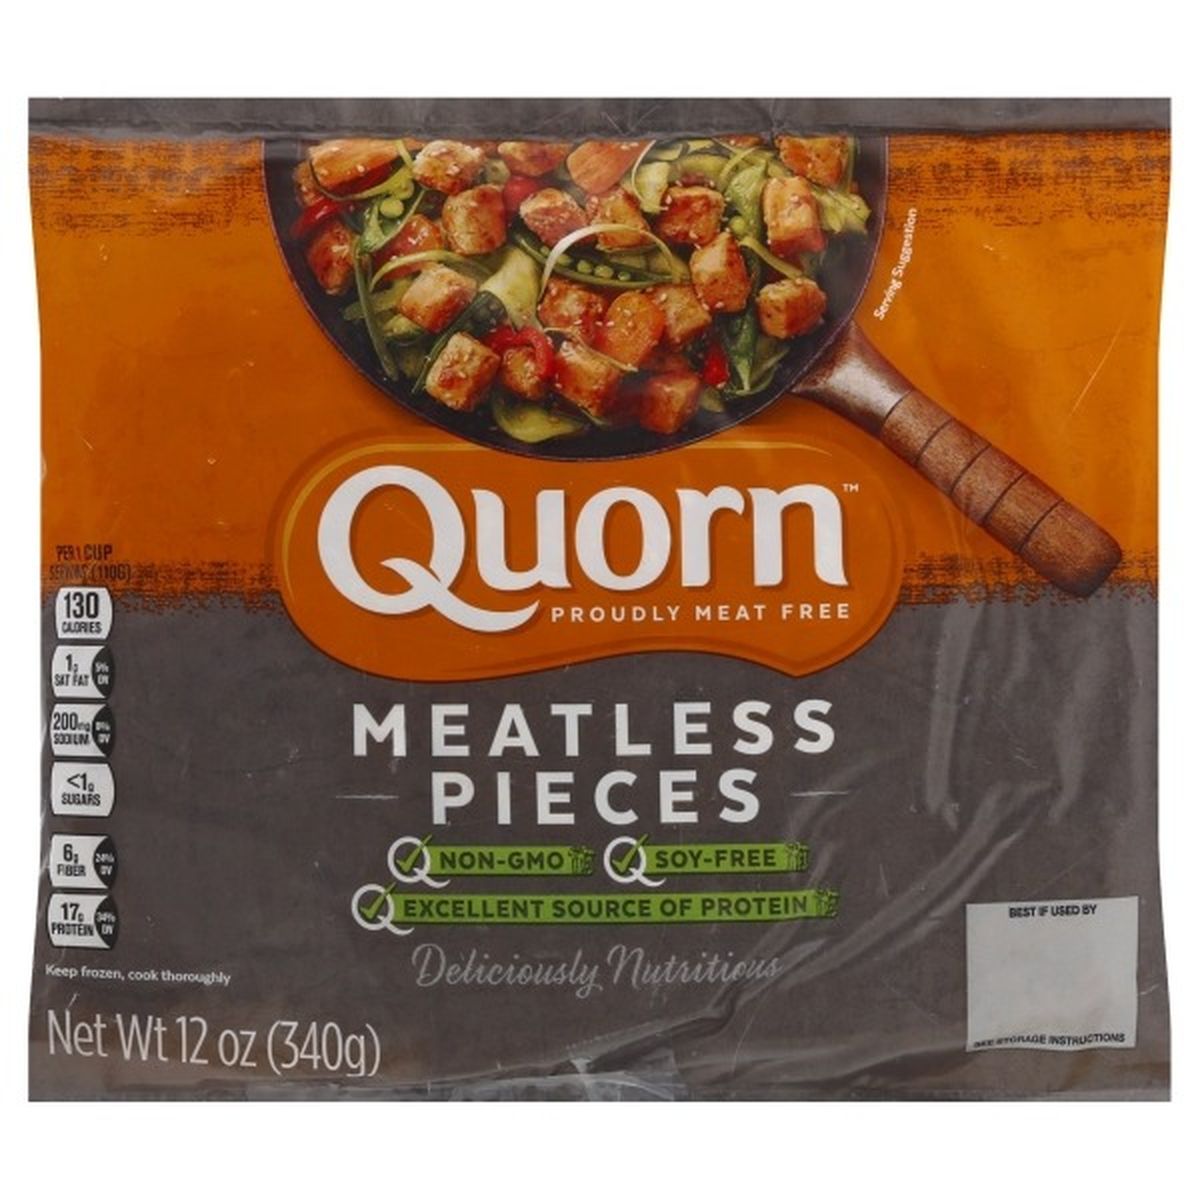 Calories in Quorn Pieces, Meatless